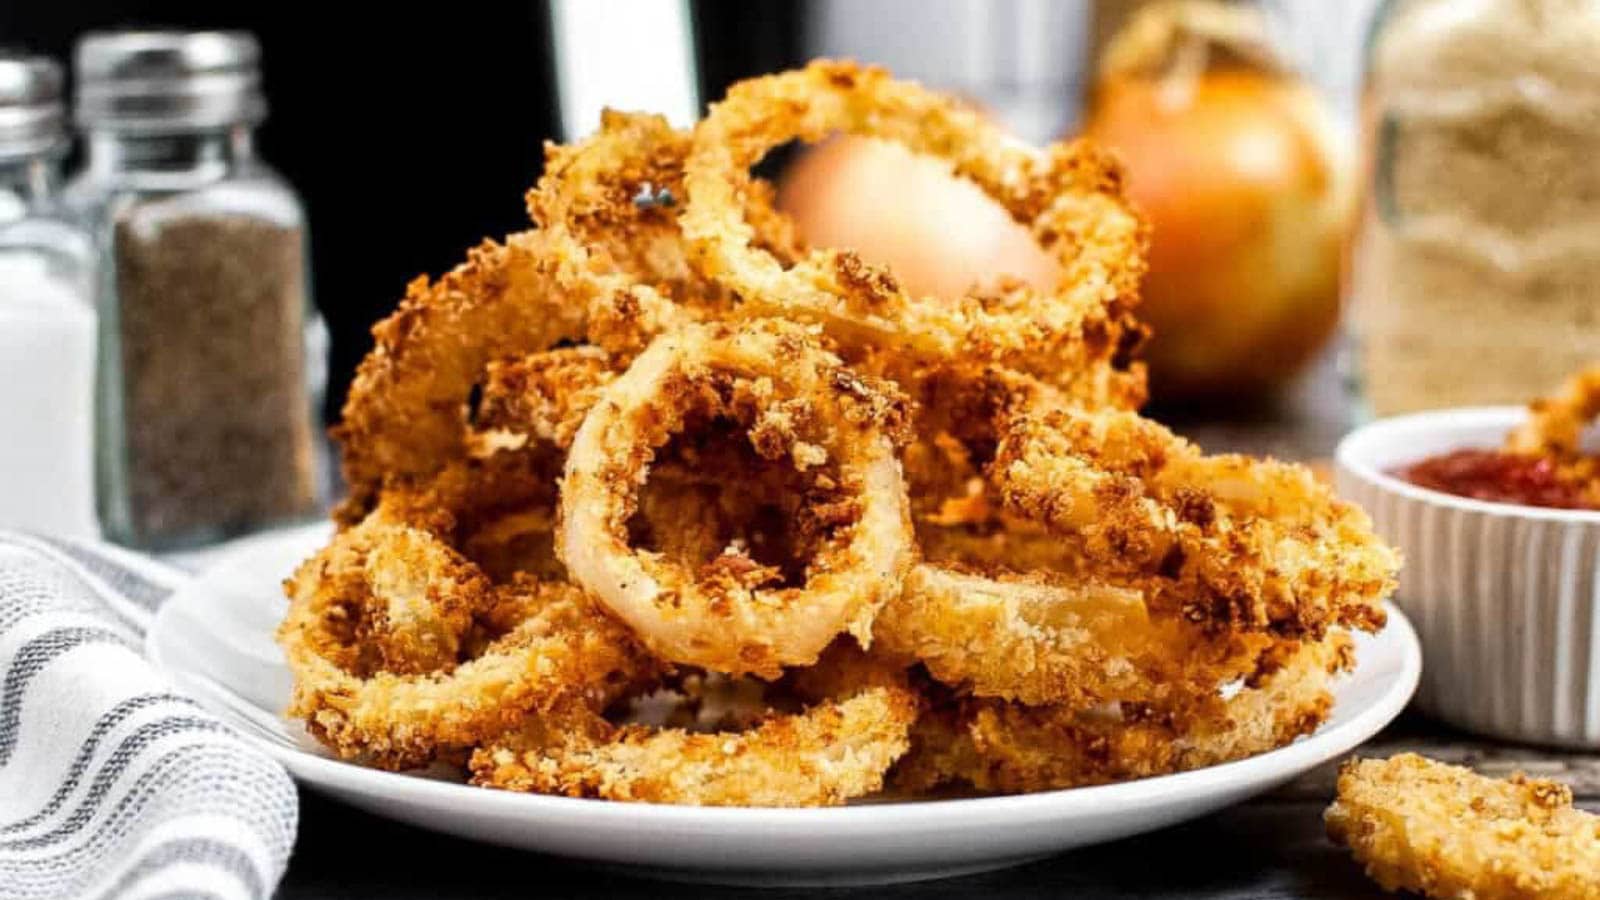 Pile of onion rings on a white plate.